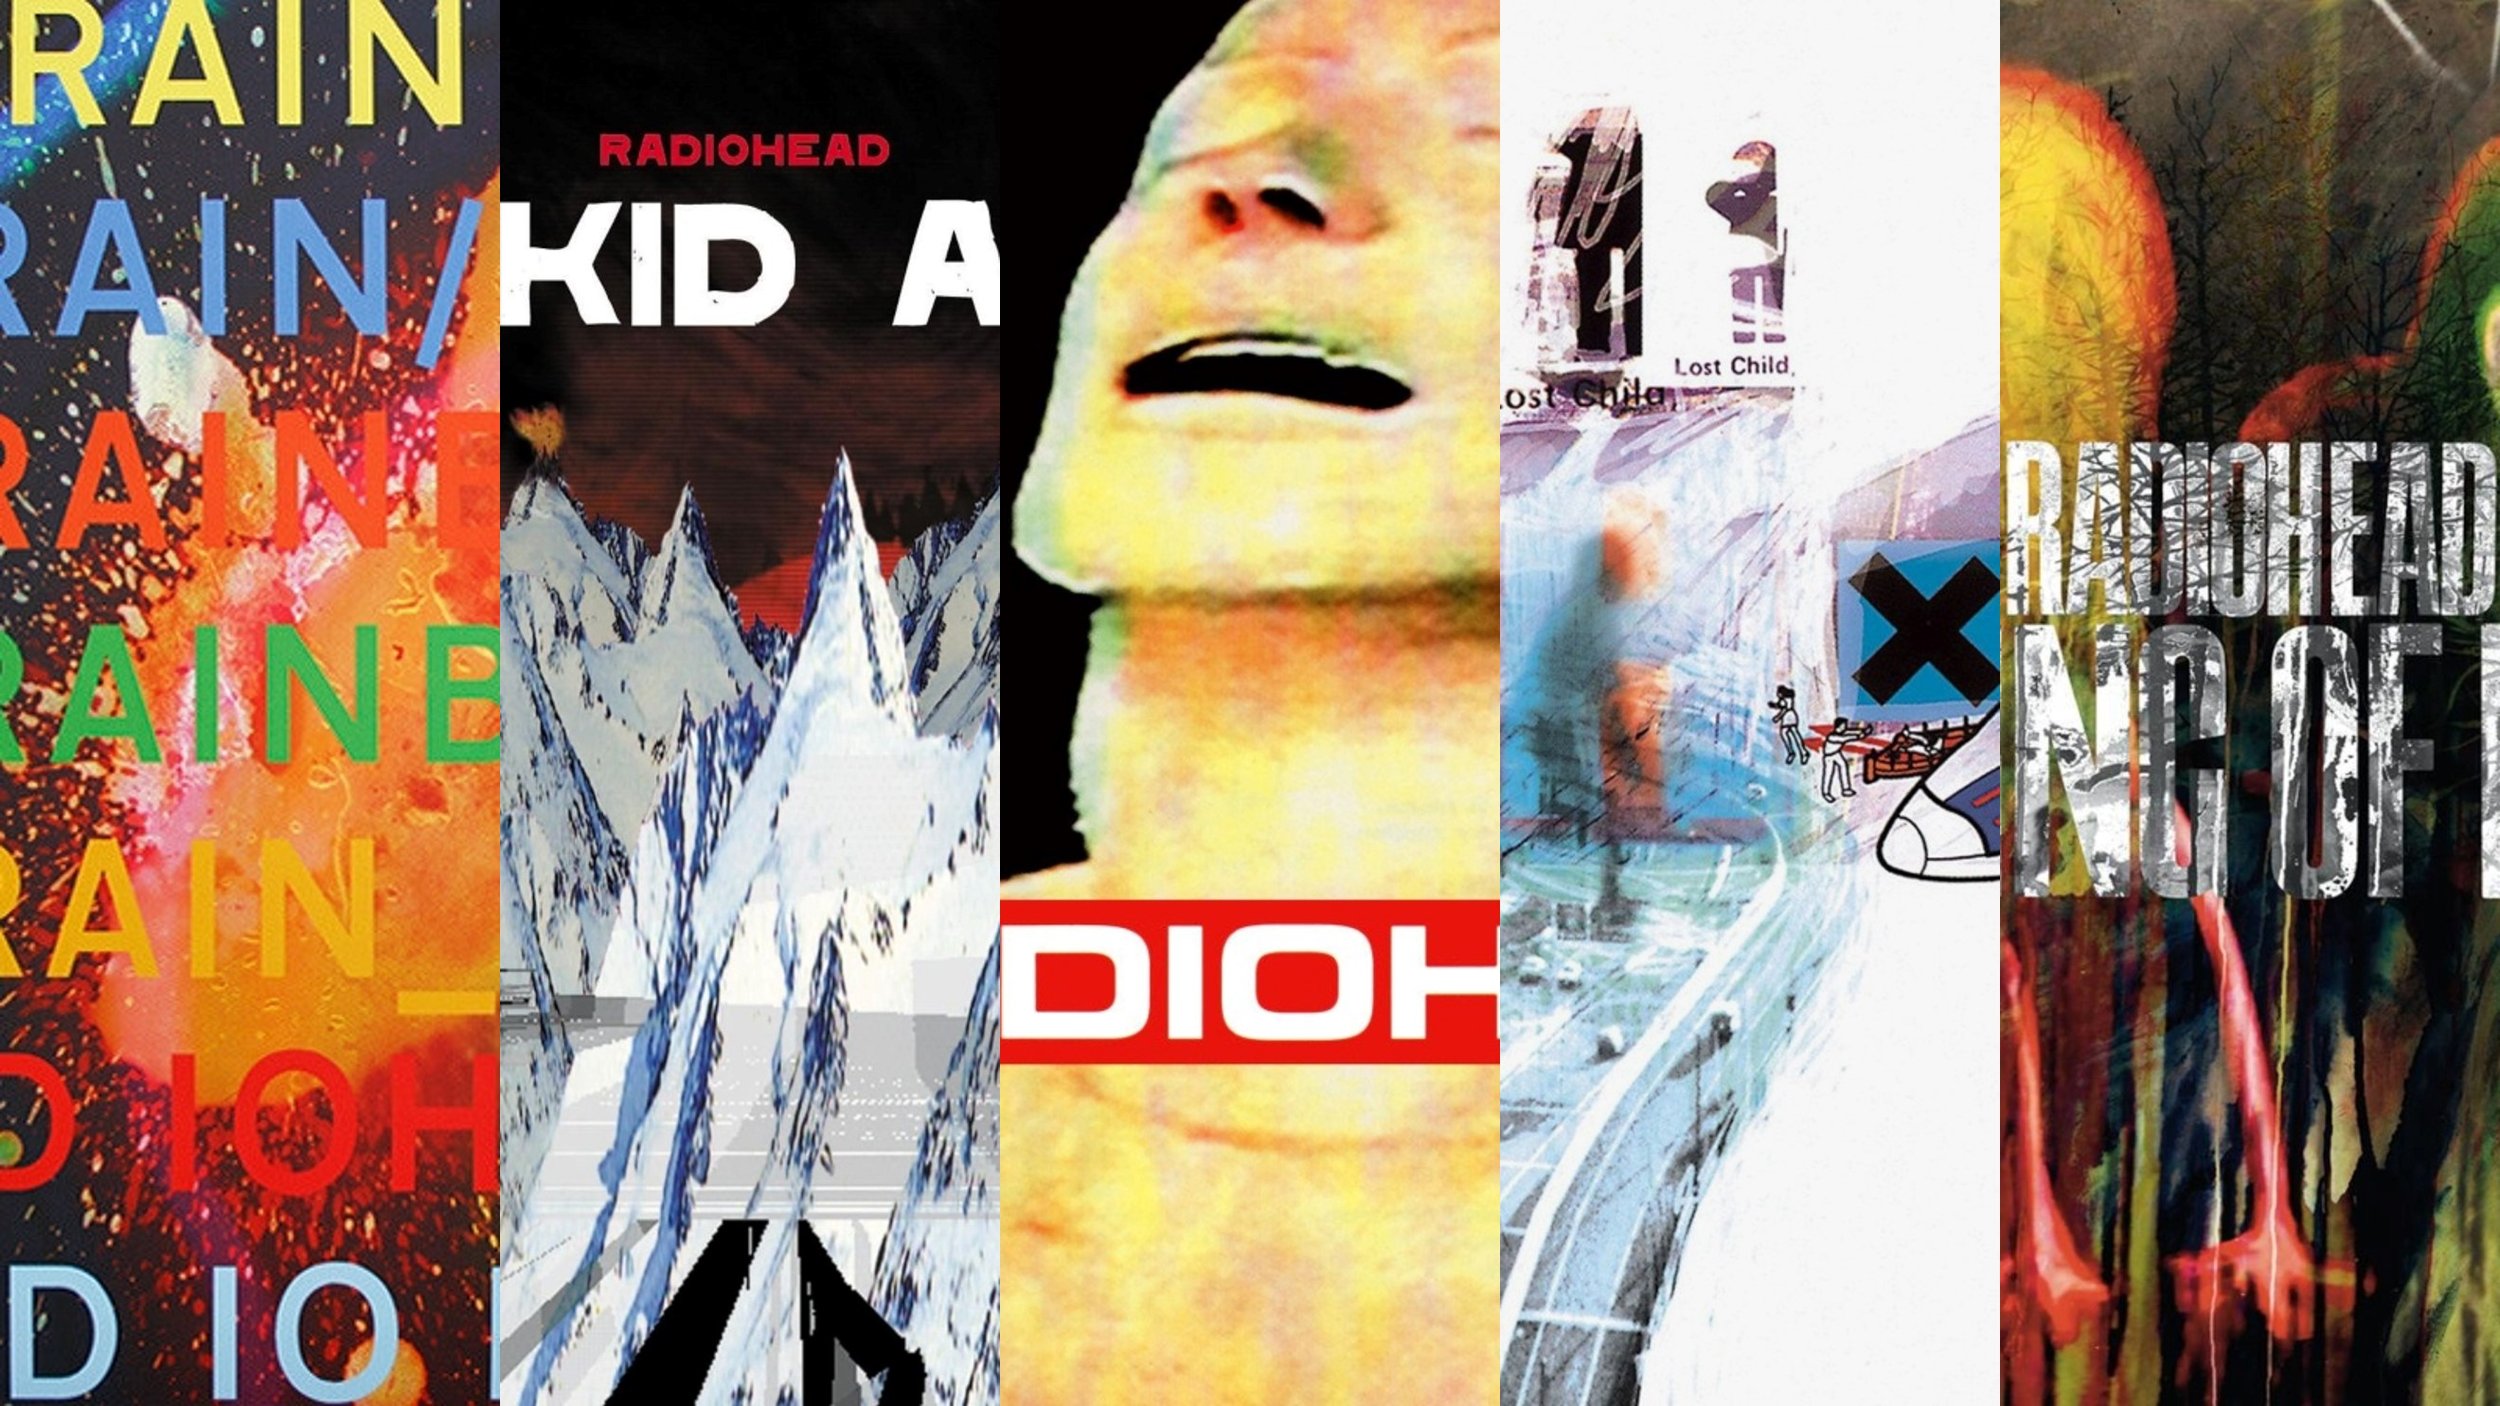 Are These Real Radiohead Lyrics? Or Are They Fake? Trivia Quiz